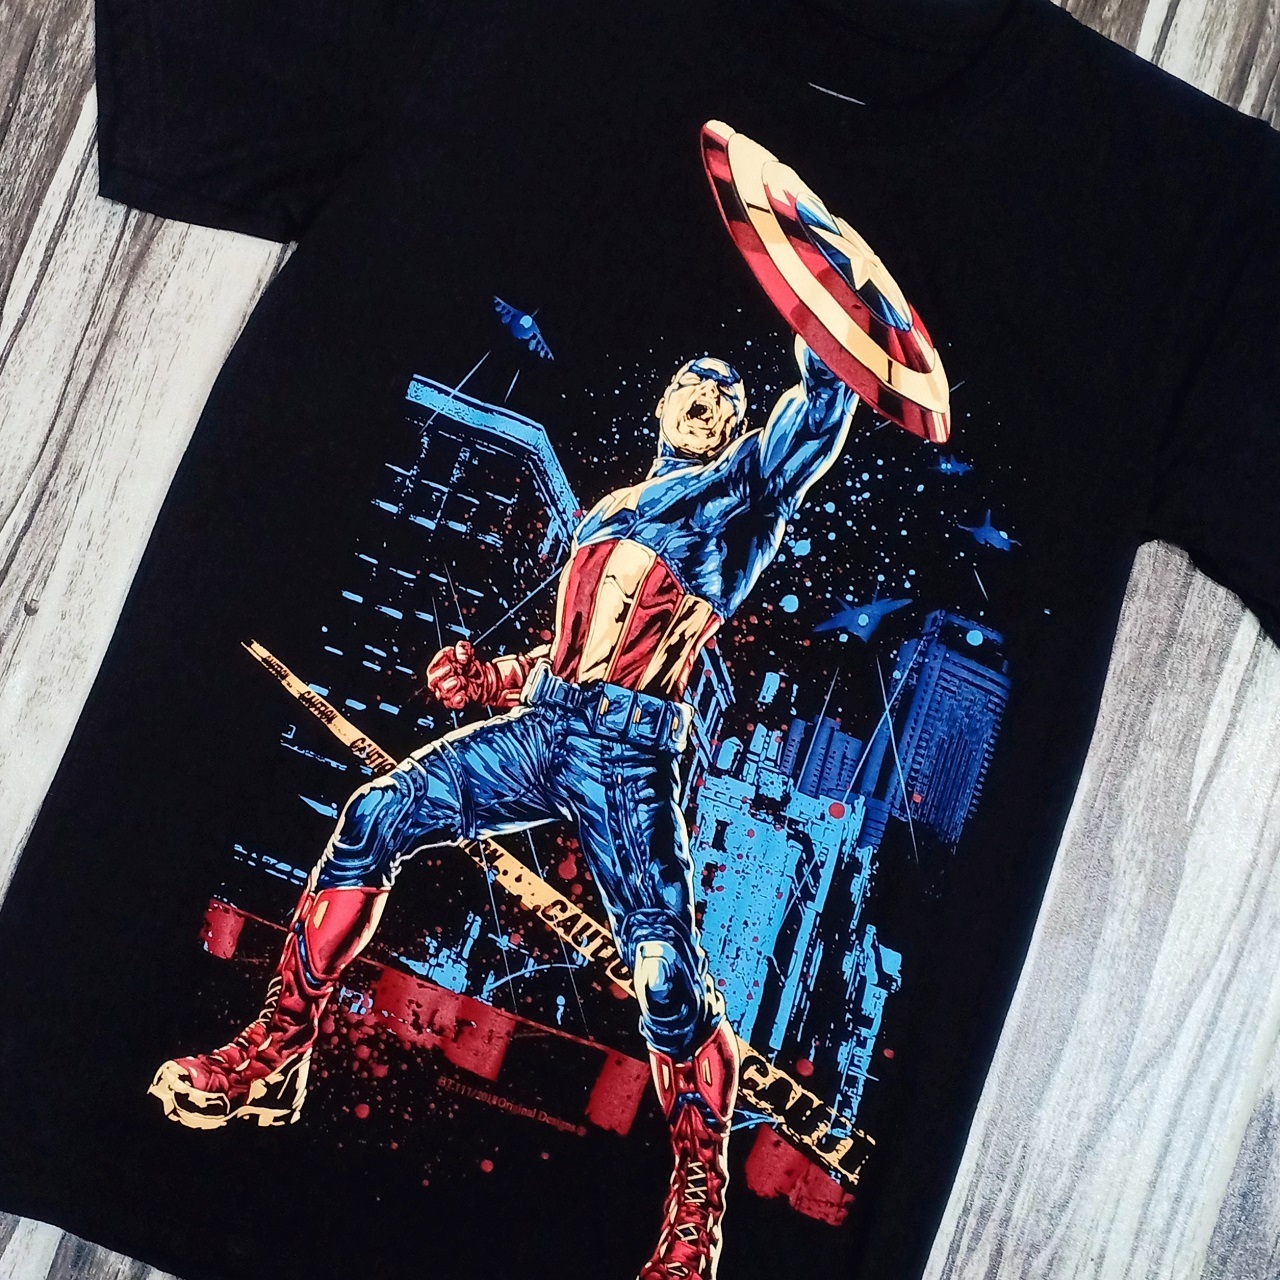 BT111 CAPTAIN AMERICA STEVE TYPE MOVIE ROGERS GRADE NEW EDITION TIMBER TIMBER SYSTEM PREMIUM SPEED HIGH SILK MARVEL BLACK COLLECTABLE QUALITY SCREEN COTTON MOAI HERO STORE – T-SHIRT COLLECTABLE AVENGERS TSHIRT BLACK